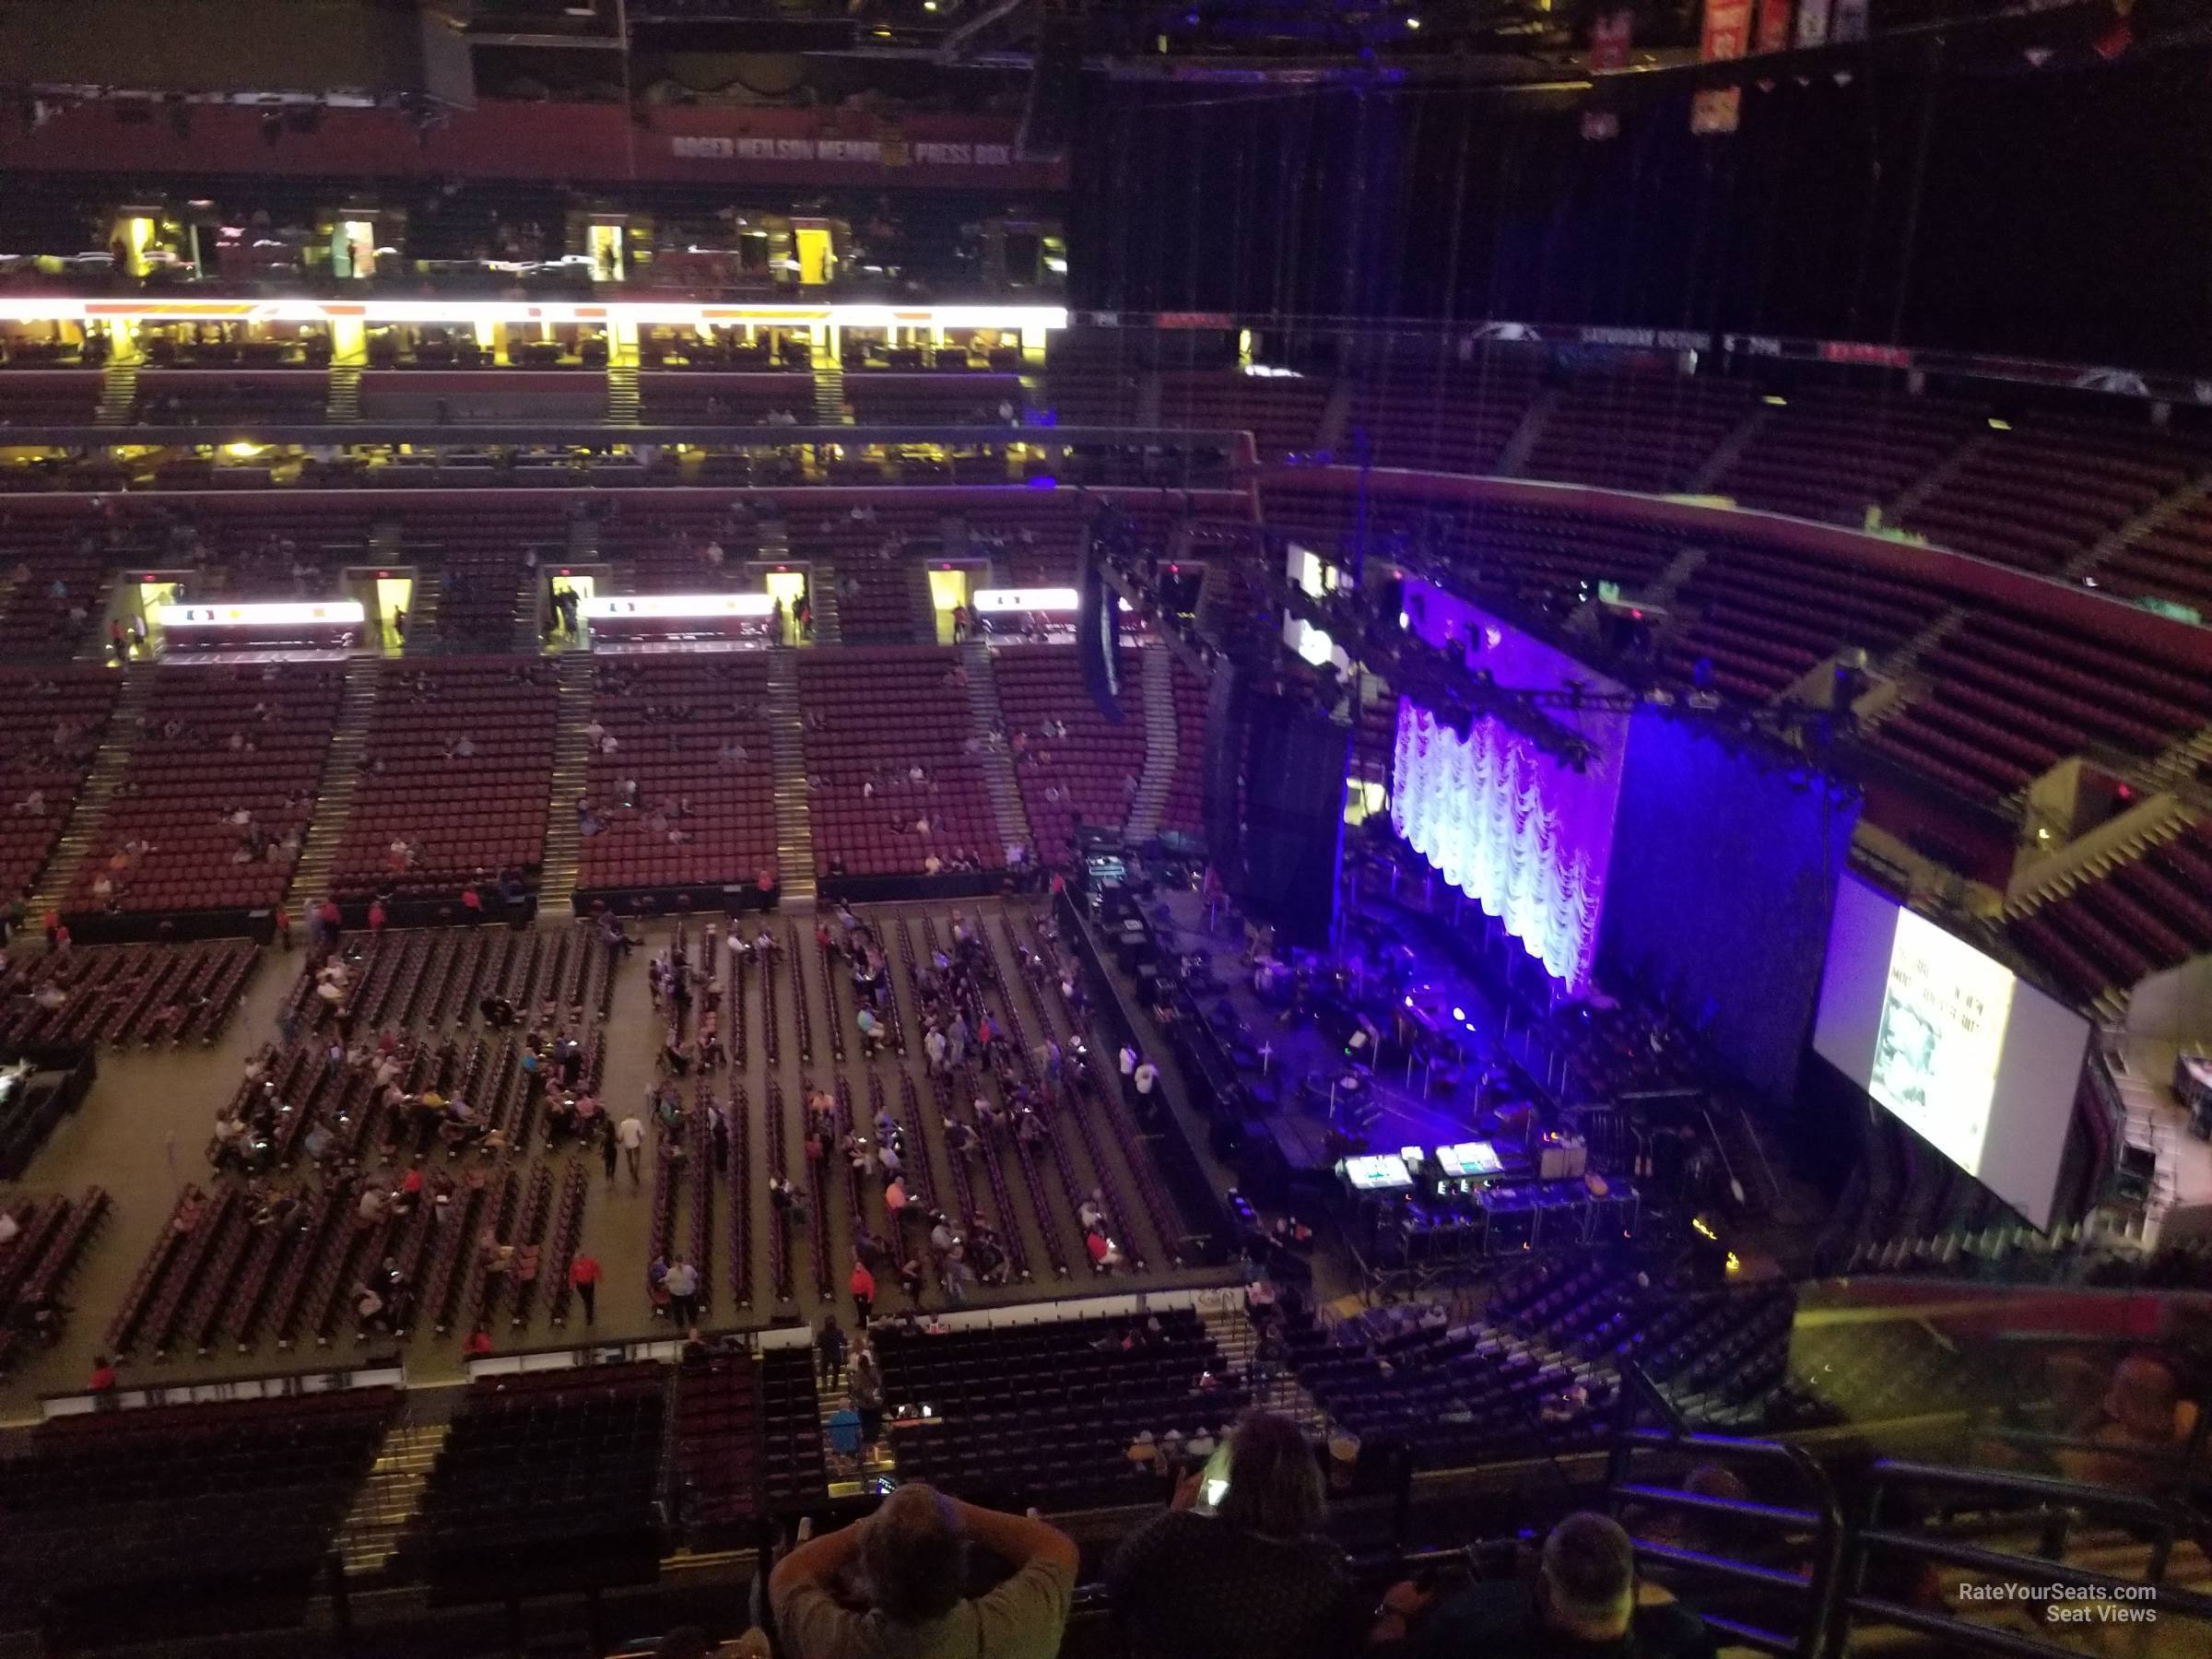 section 334, row 7 seat view  for concert - fla live arena